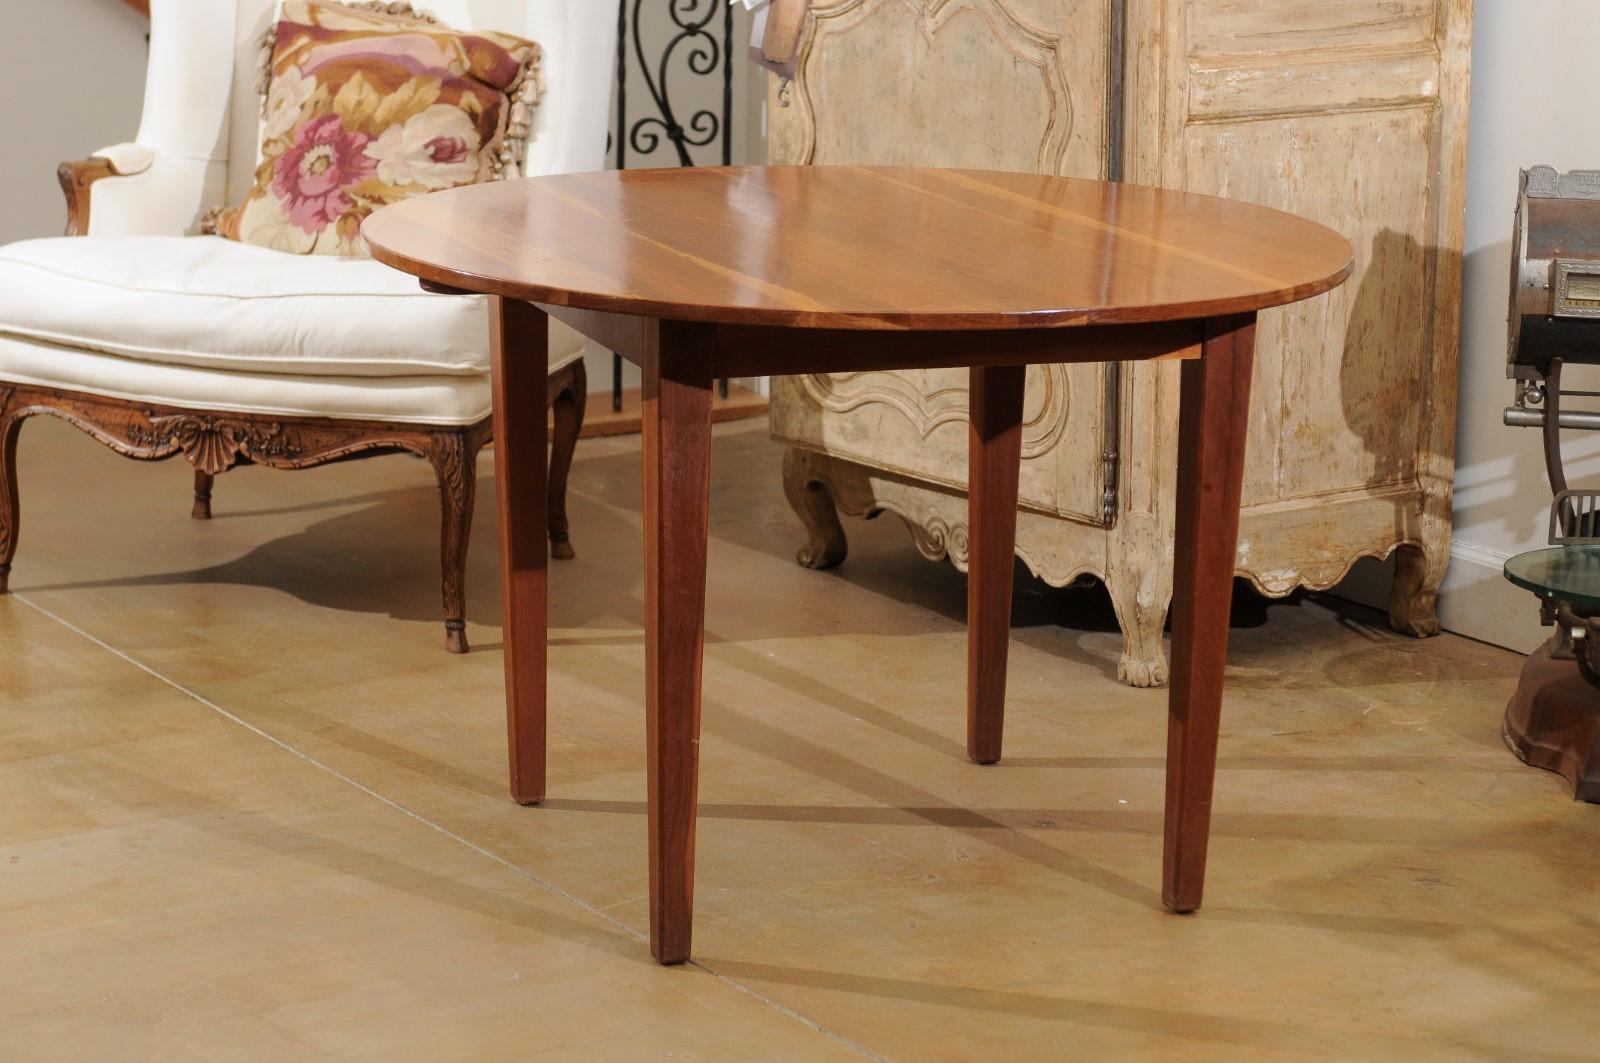 An American round cherry dining table from the 20th century, with tapered legs and square apron. Simple yet elegant, this American cherry dining table charms us with its pure lines and lovely finish. A two-toned circular top sits on a square apron